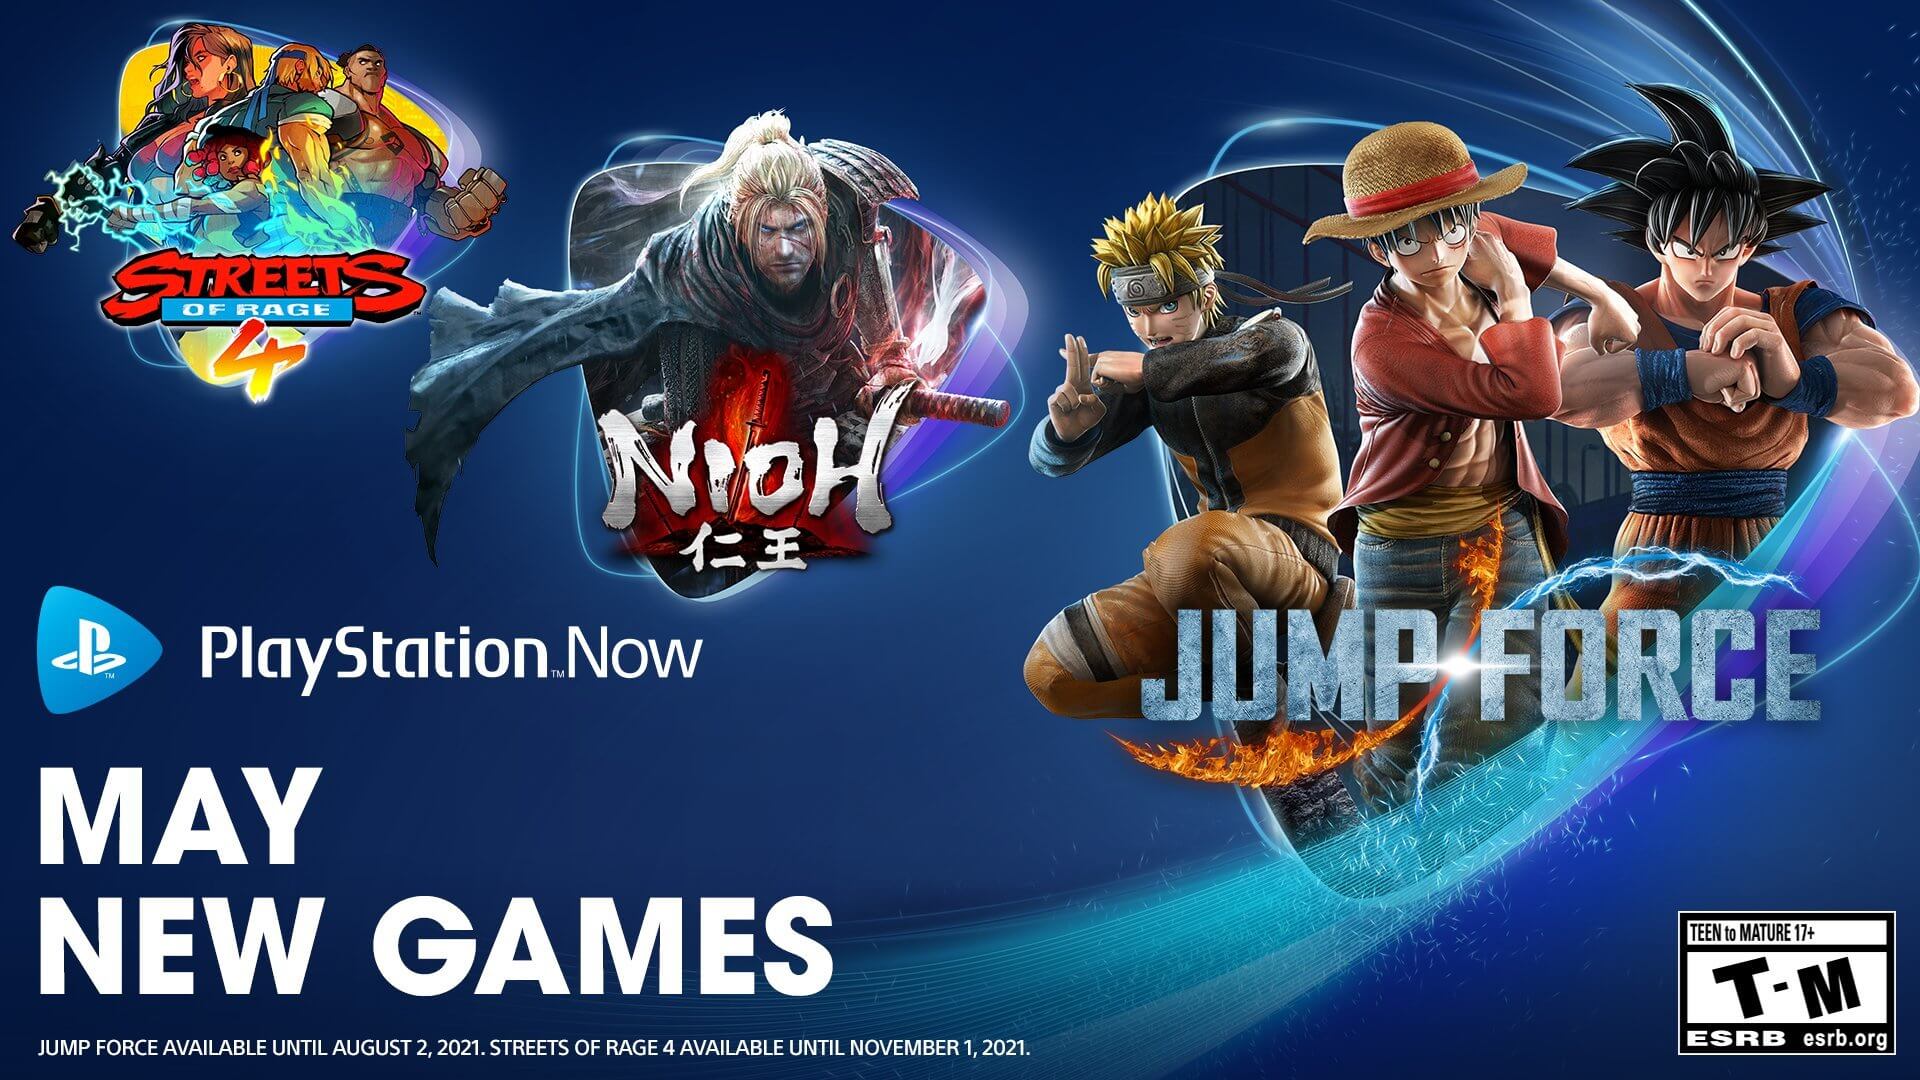 PlayStation Now Sony, May 4